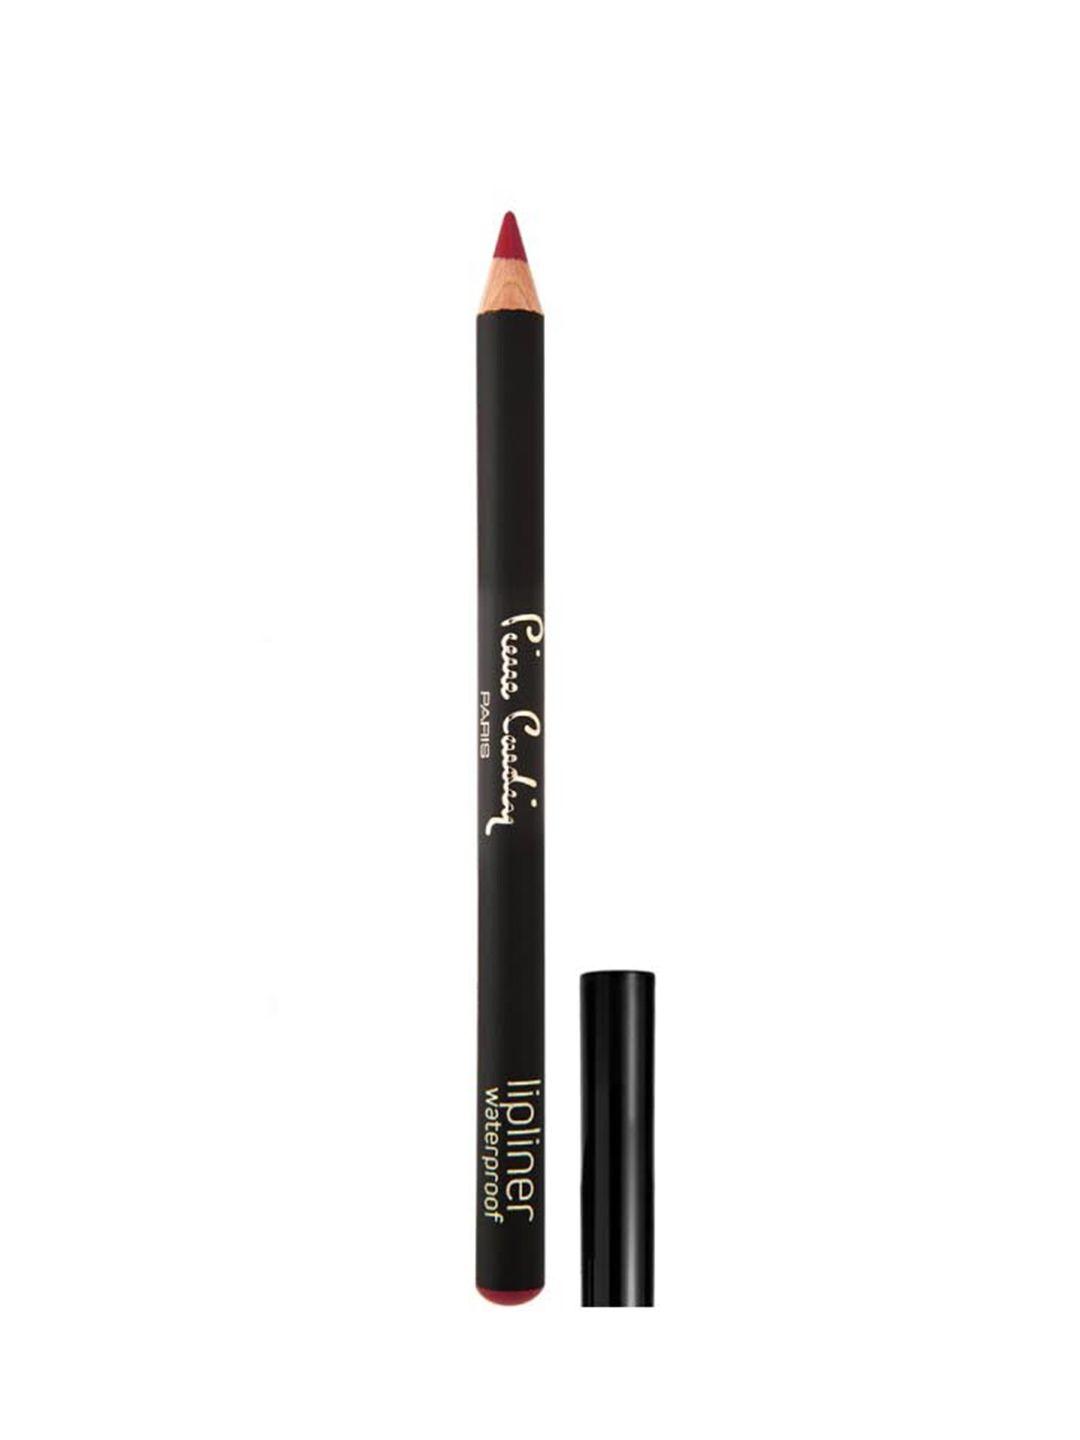 pierre cardin paris waterproof & longlasting lip liner pencil with vitamin e 0.4g - red passion 610